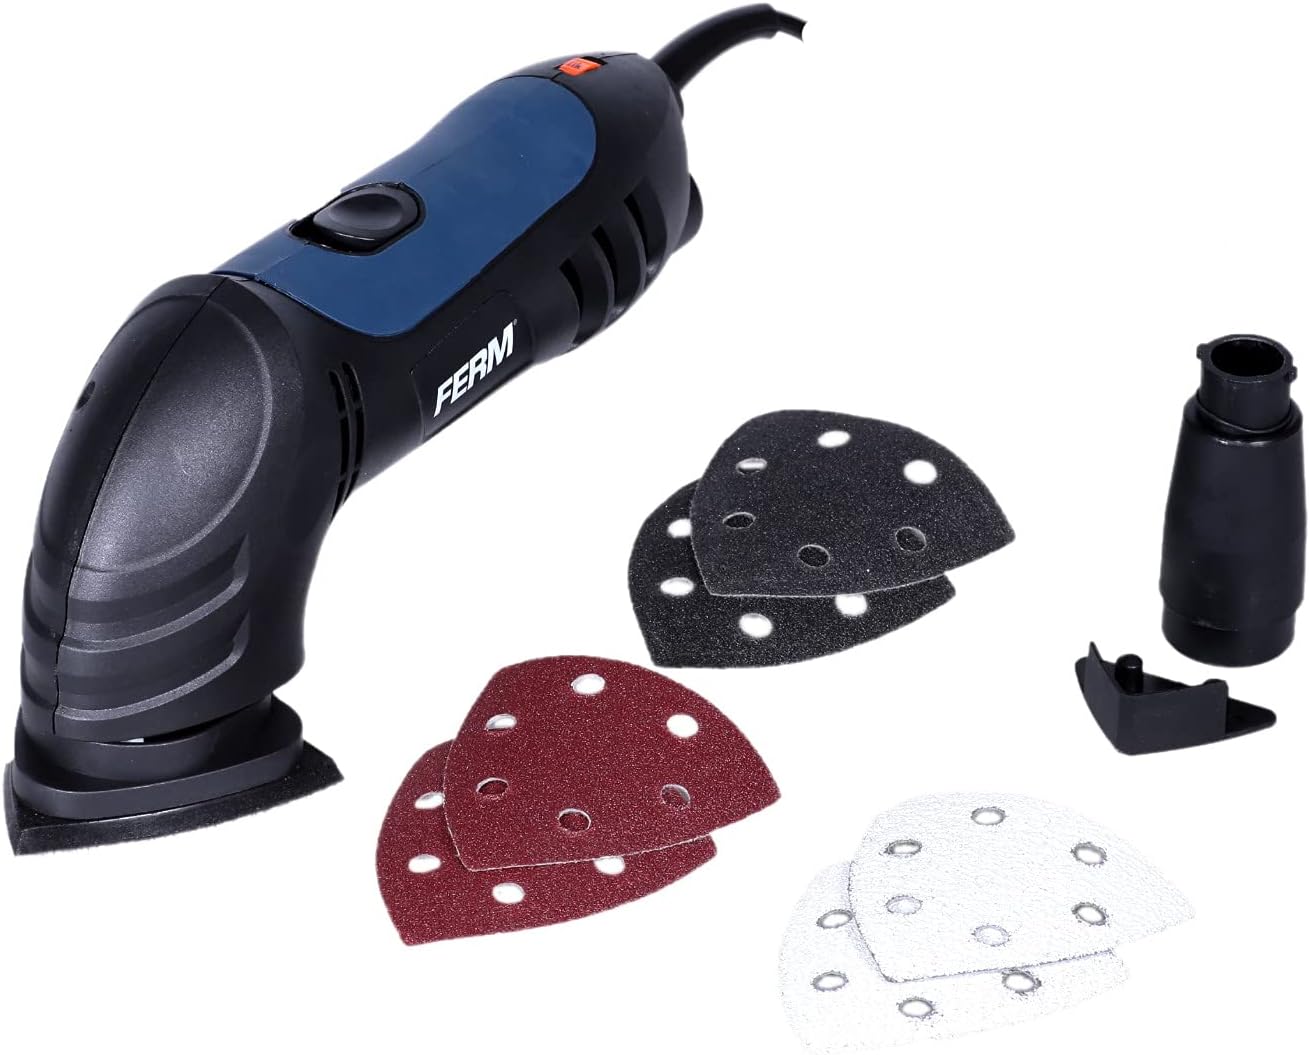 Ferm Delta Sander With Sanding Sheets And Dust Collection Adapter